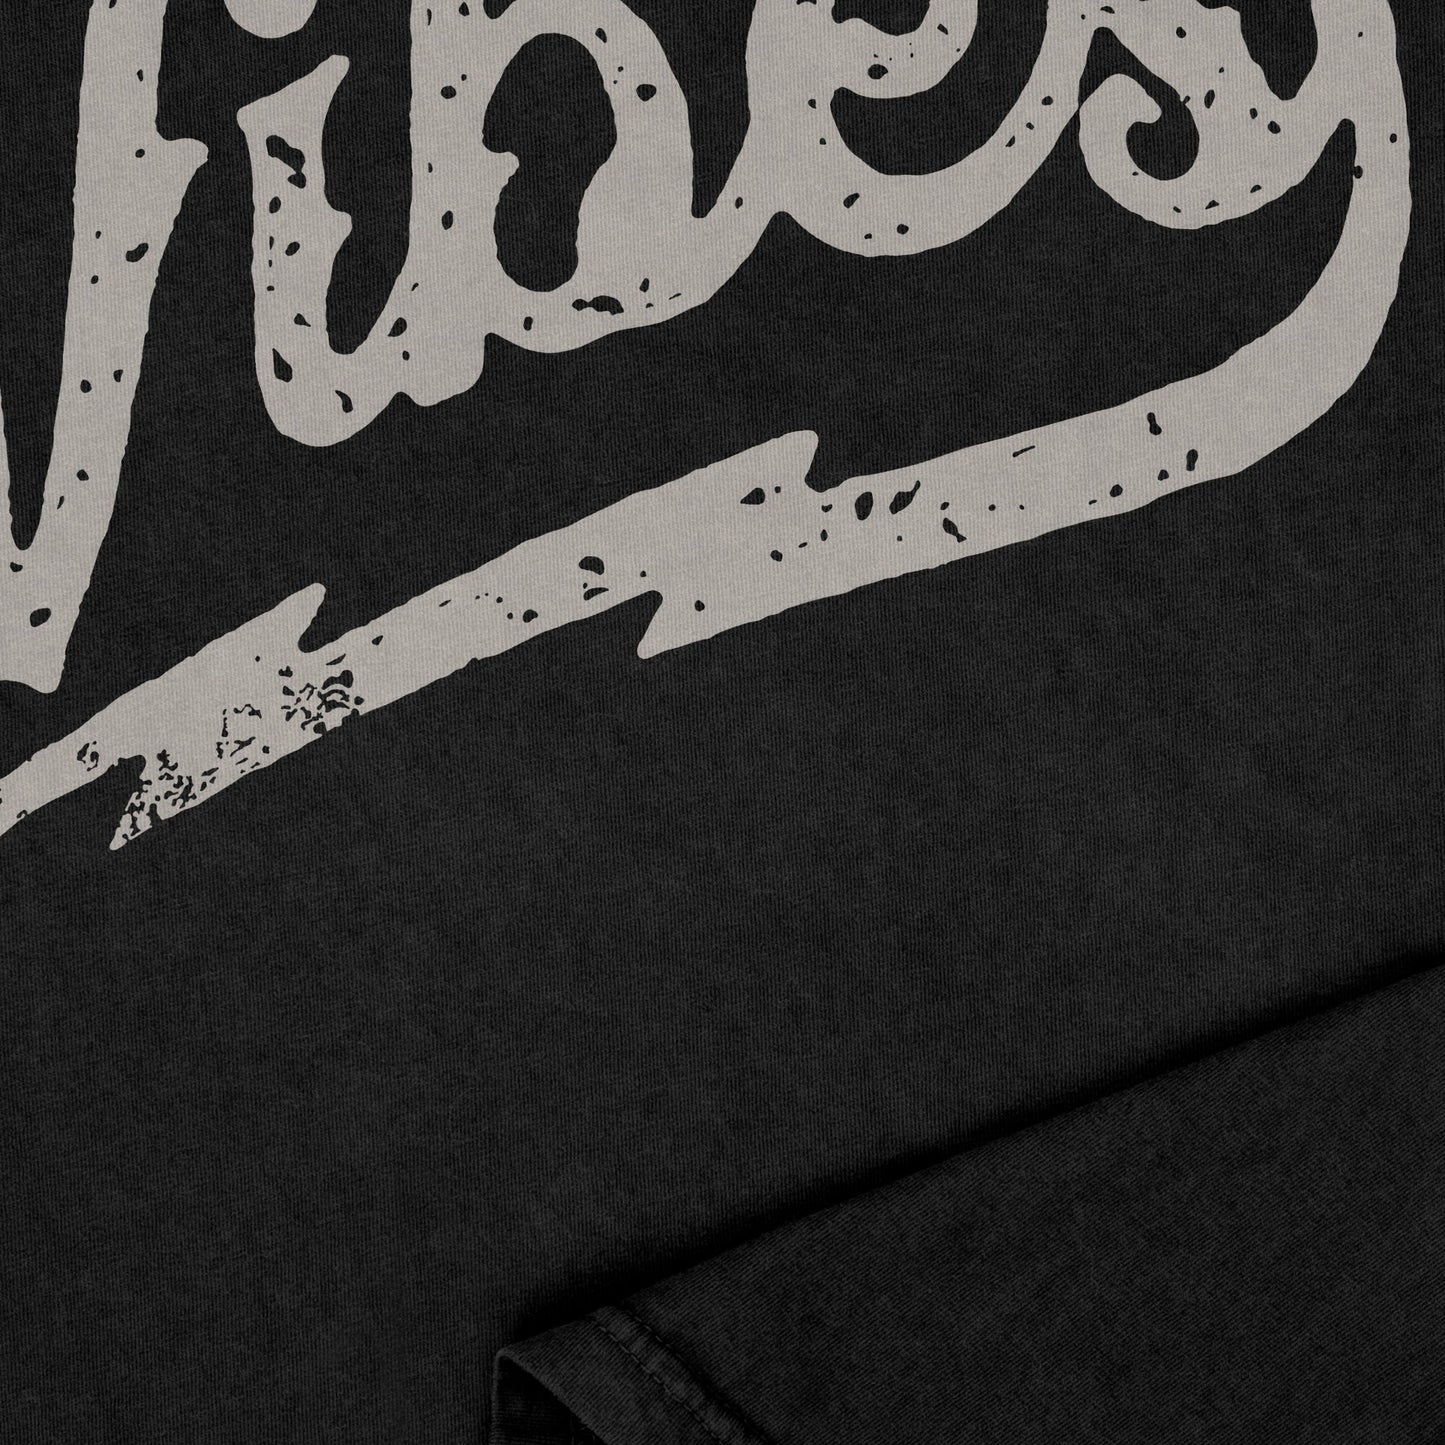 Rocking Vibes Garment-Dyed Tee - Stories You Can Wear